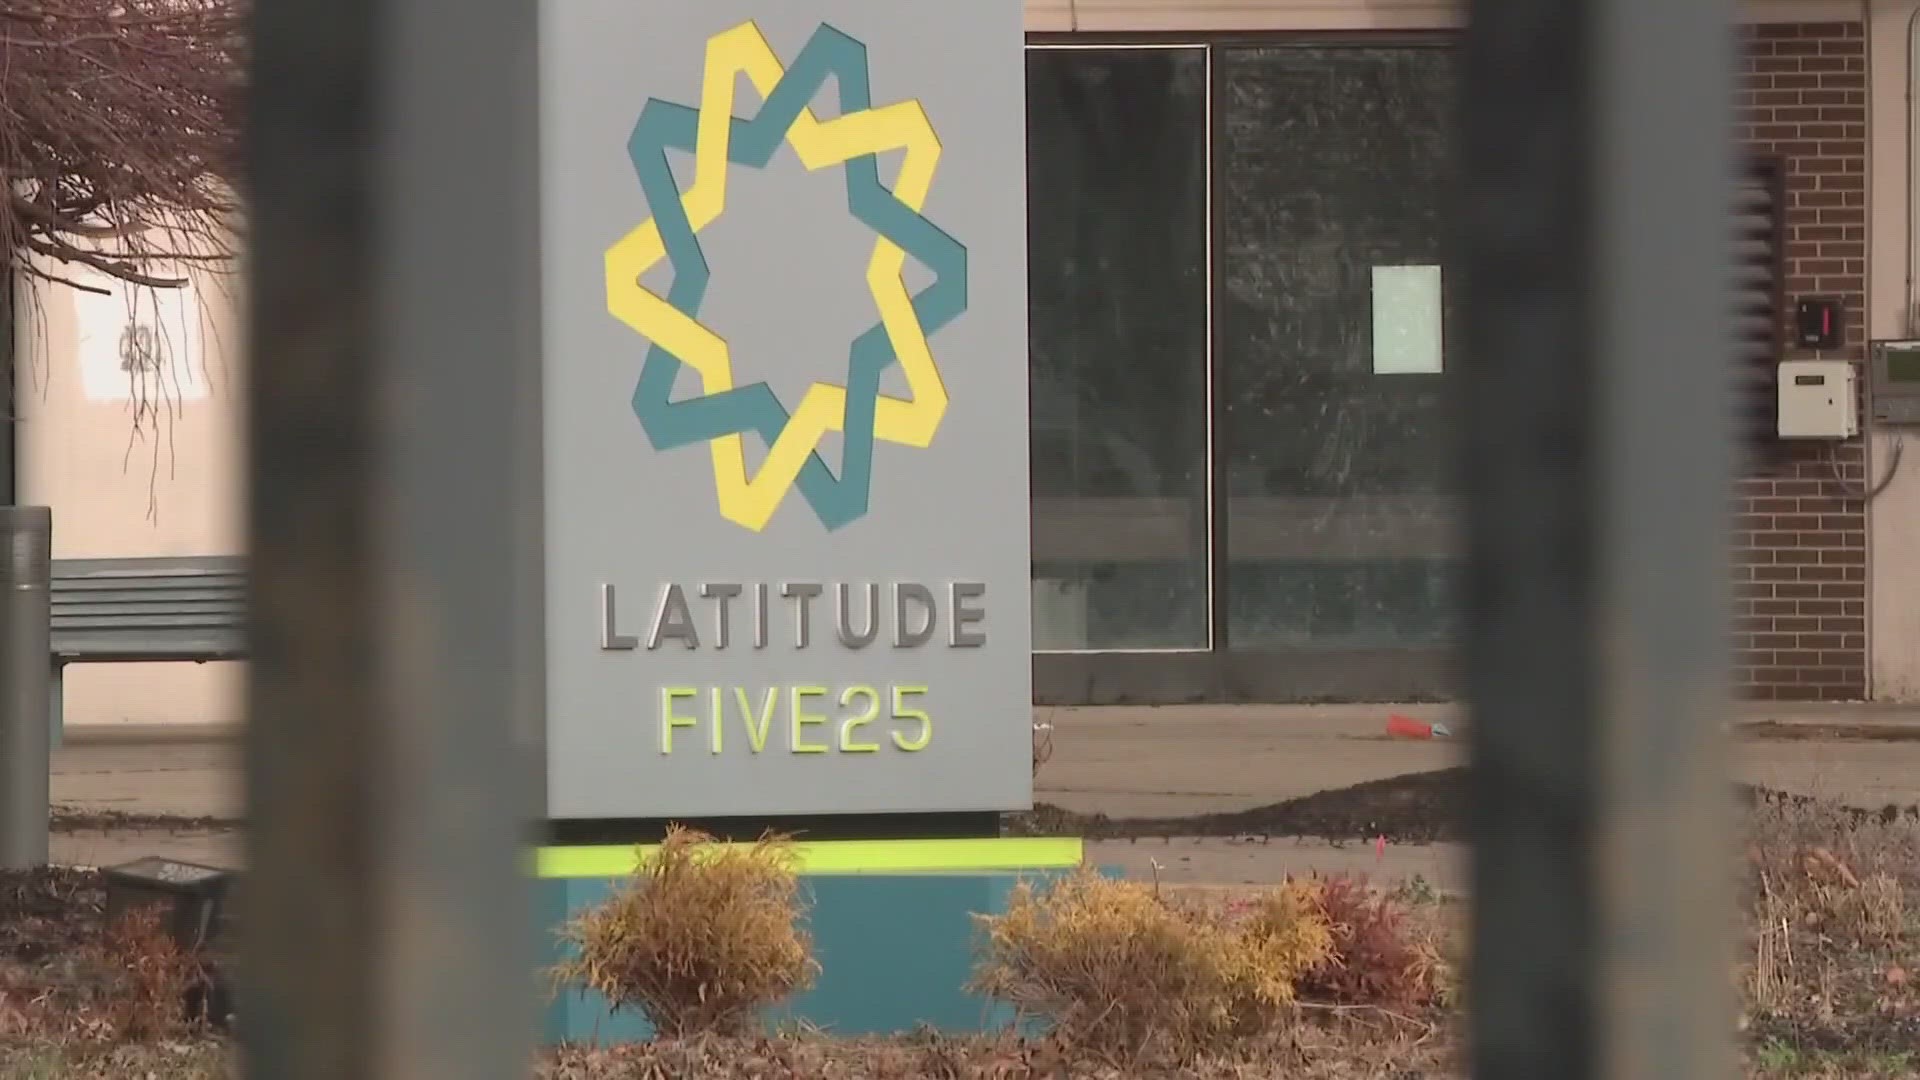 The city of Columbus’ motion to dismiss the bankruptcy filing of Paxe Latitude was rejected by a federal judge in New Jersey.